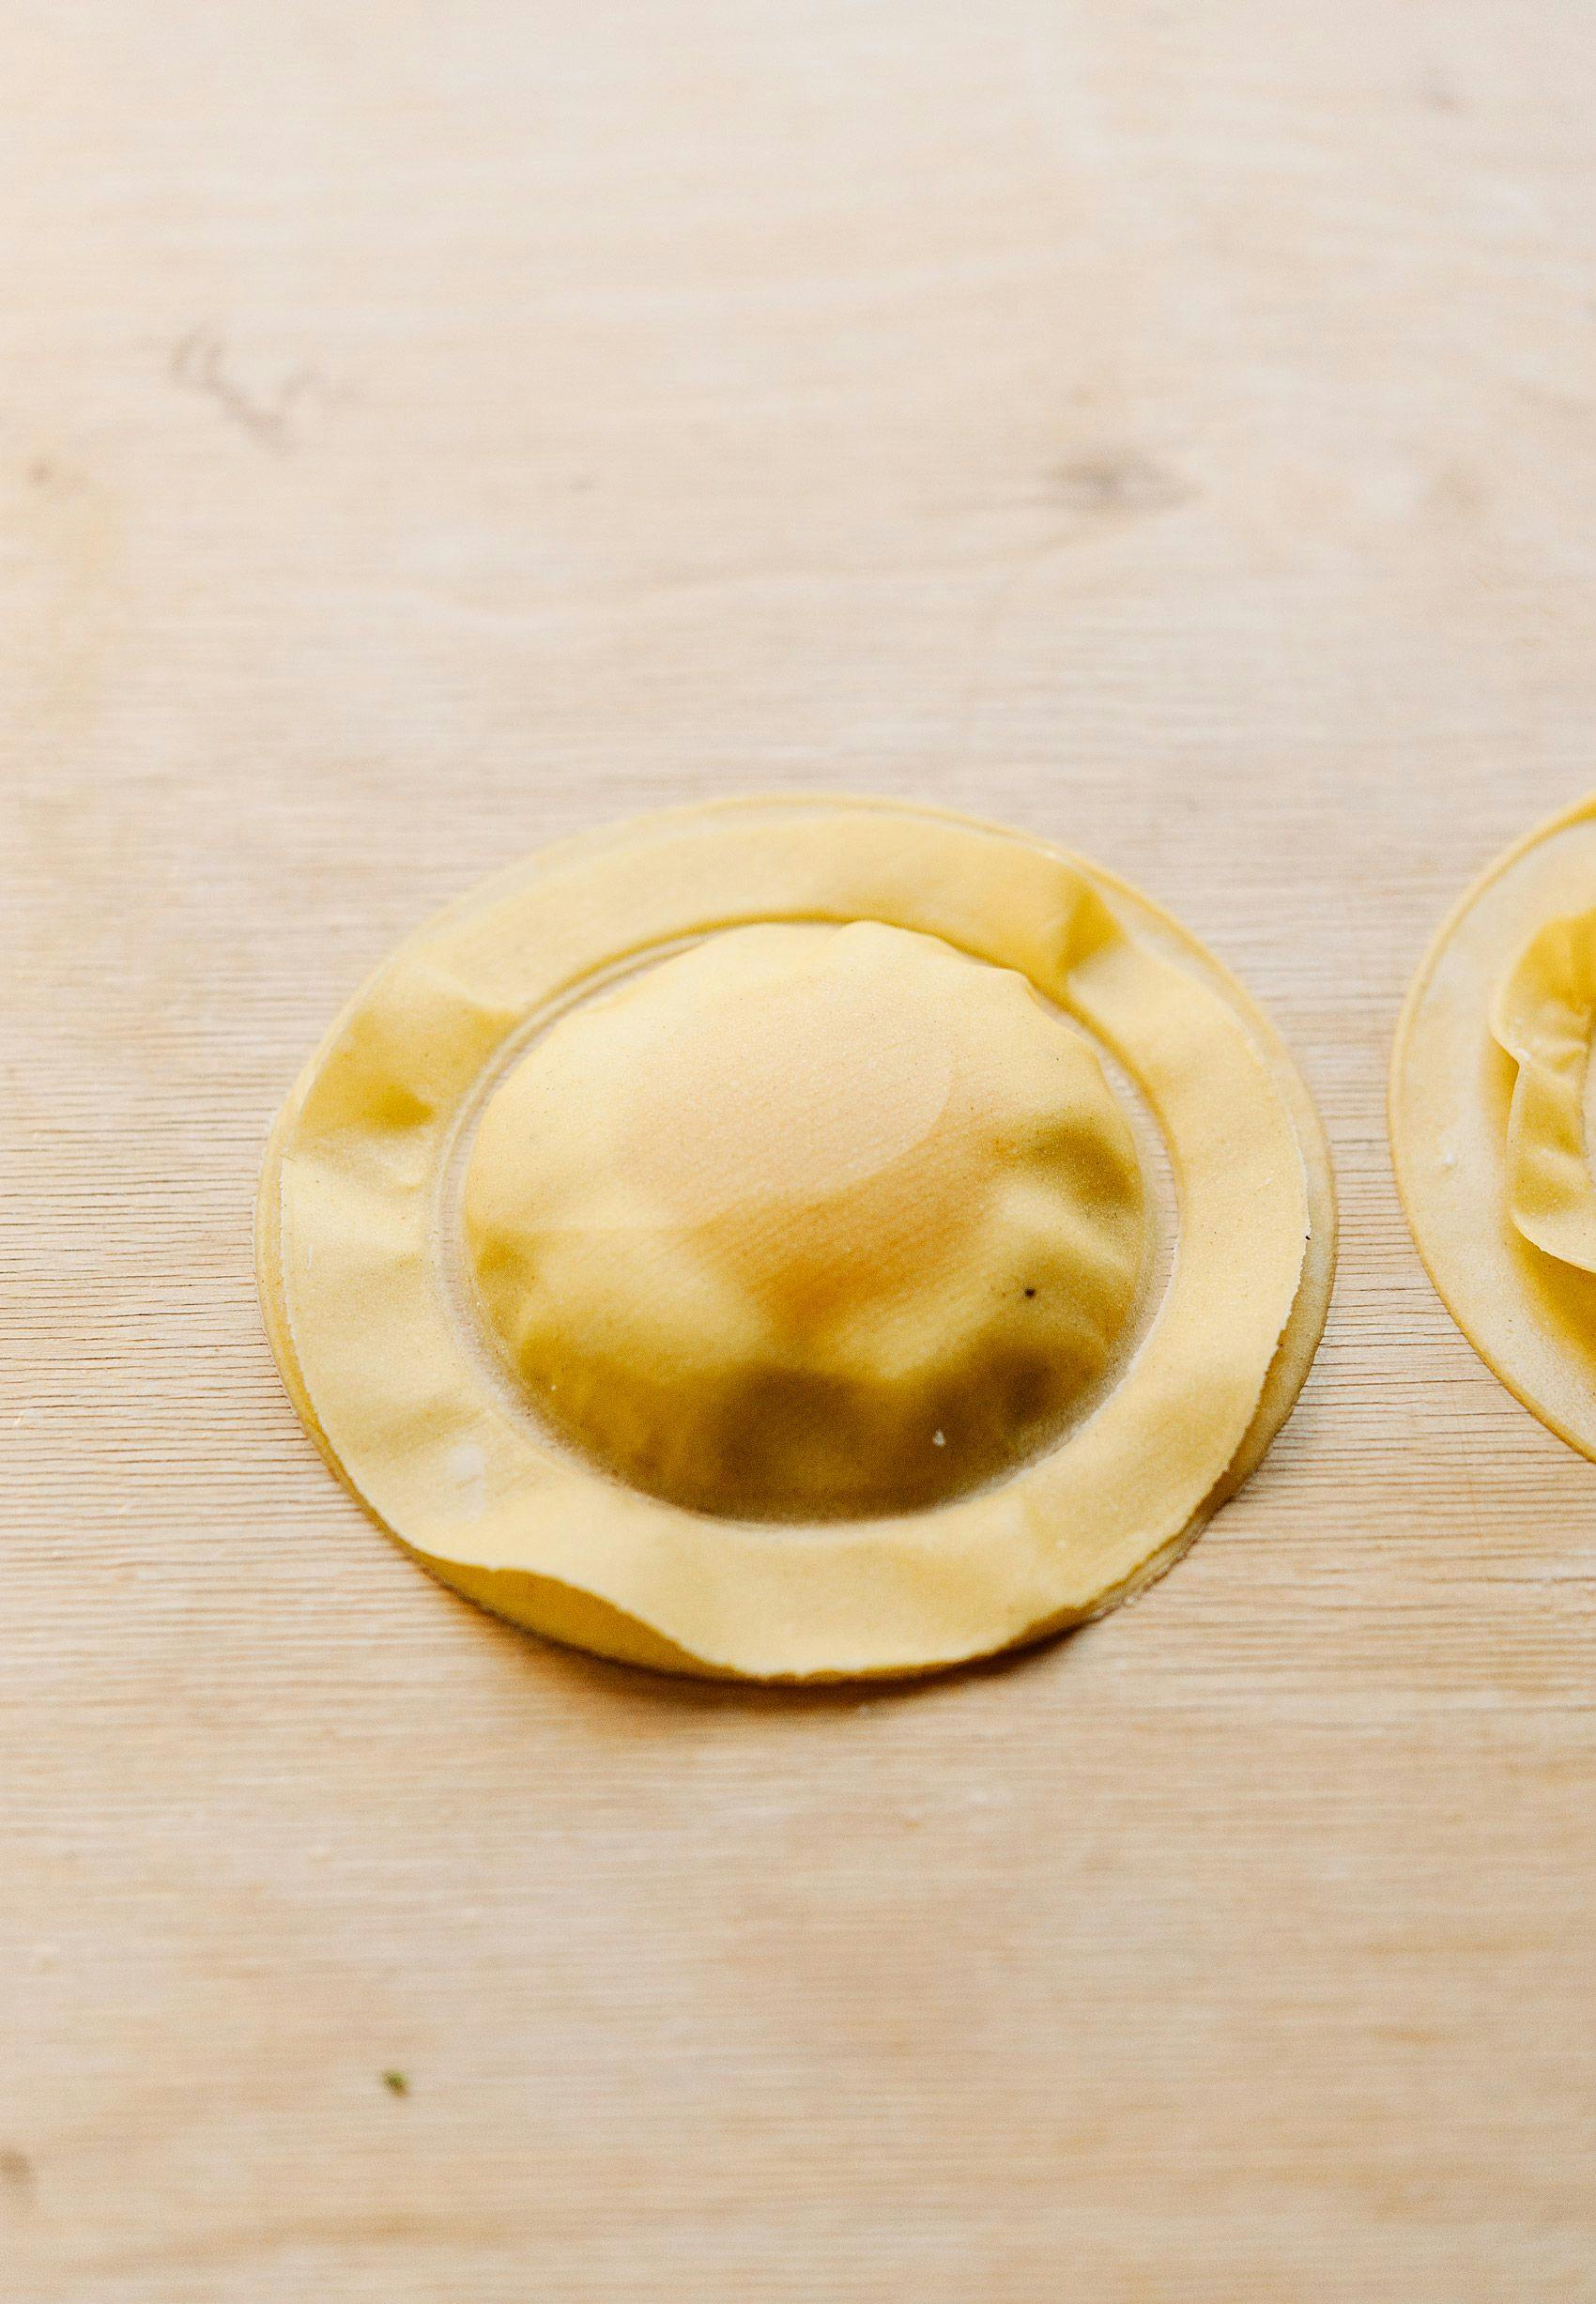 Ready filled raviolo